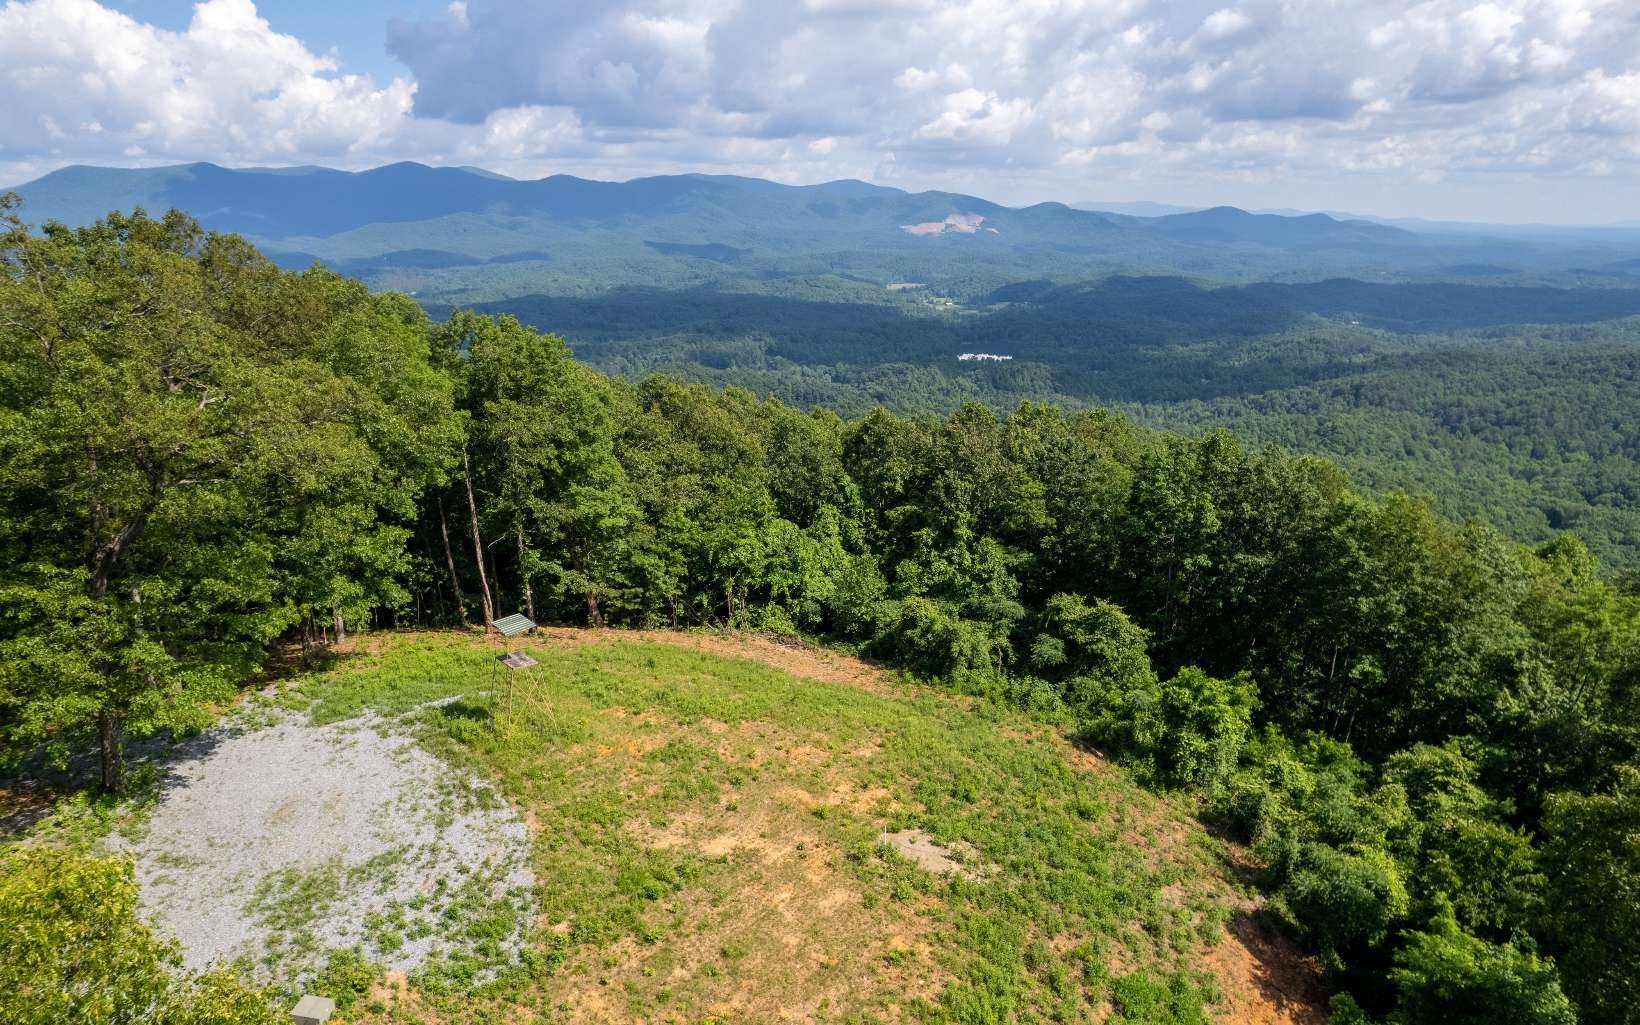 This unique 2550 ft elevation lot has 1.49 acres that encompasses the entire top of Double Knob Mountain in the exclusive ““Eagles View “ Subdivision. This lot is already partially cleared for incredible views of the Cohutta Wilderness to the North and the Rich Mountain Wilderness to the South. Underground power, telephone already in place, and a has a new 10 gpm well with excellent tasting Spring water. Lots 5 and 6 are also available for additional privacy.